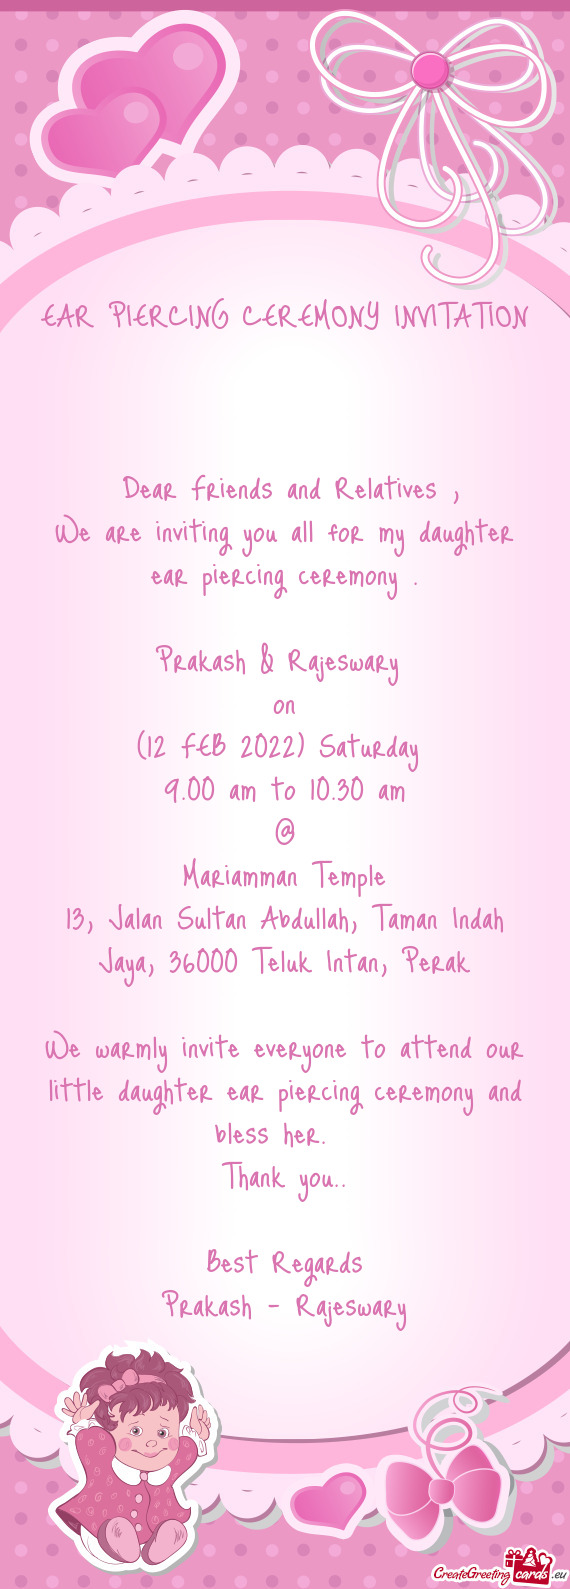 We warmly invite everyone to attend our little daughter ear piercing ceremony and bless her